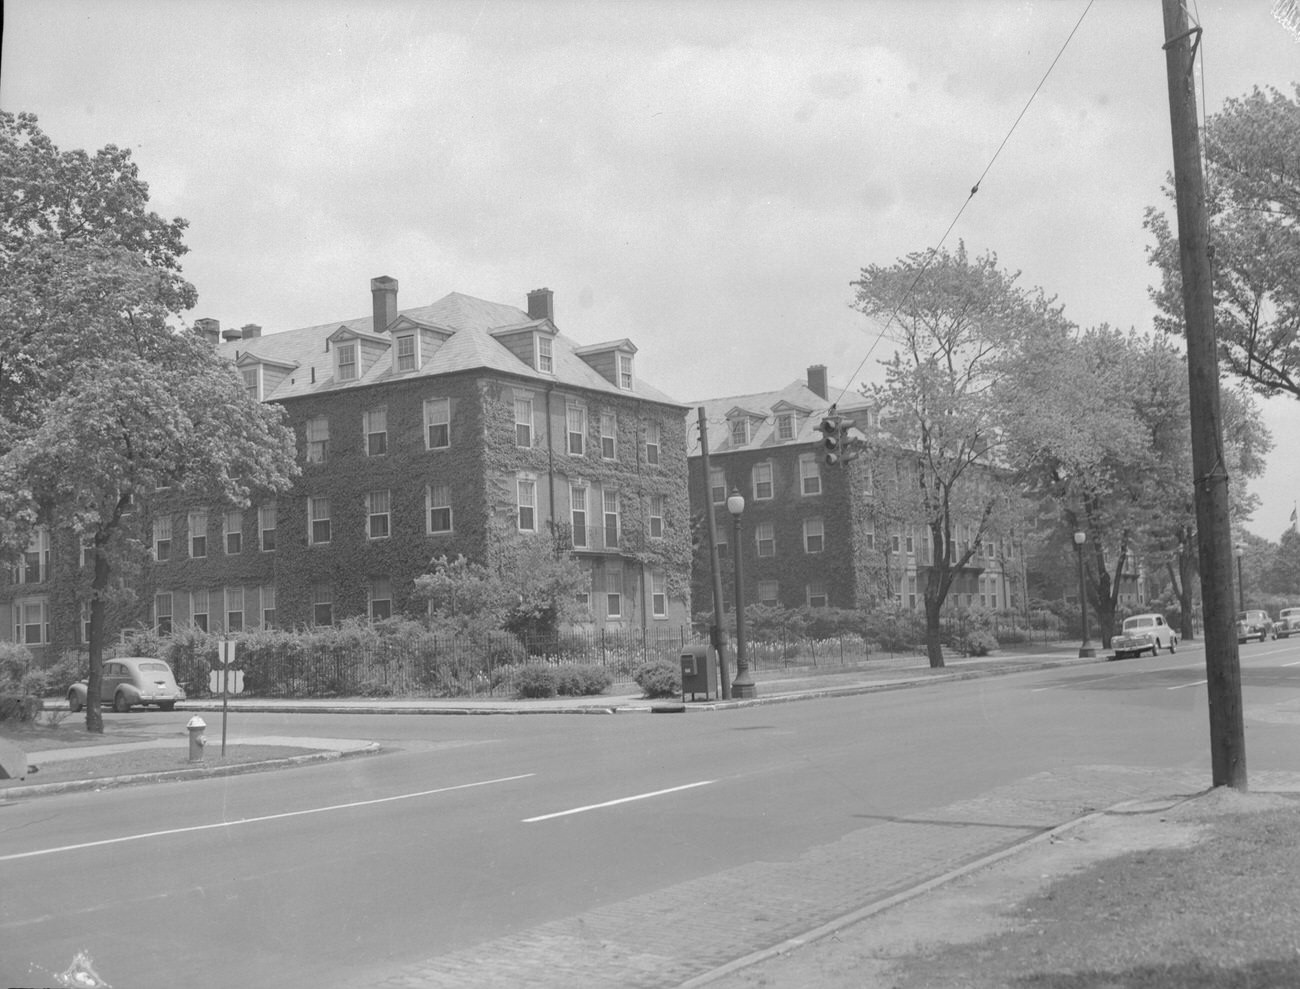 Broad-Ohio Apartments, corner of Ohio Avenue and Broad Street, built as early as 1926, photograph from 1948.